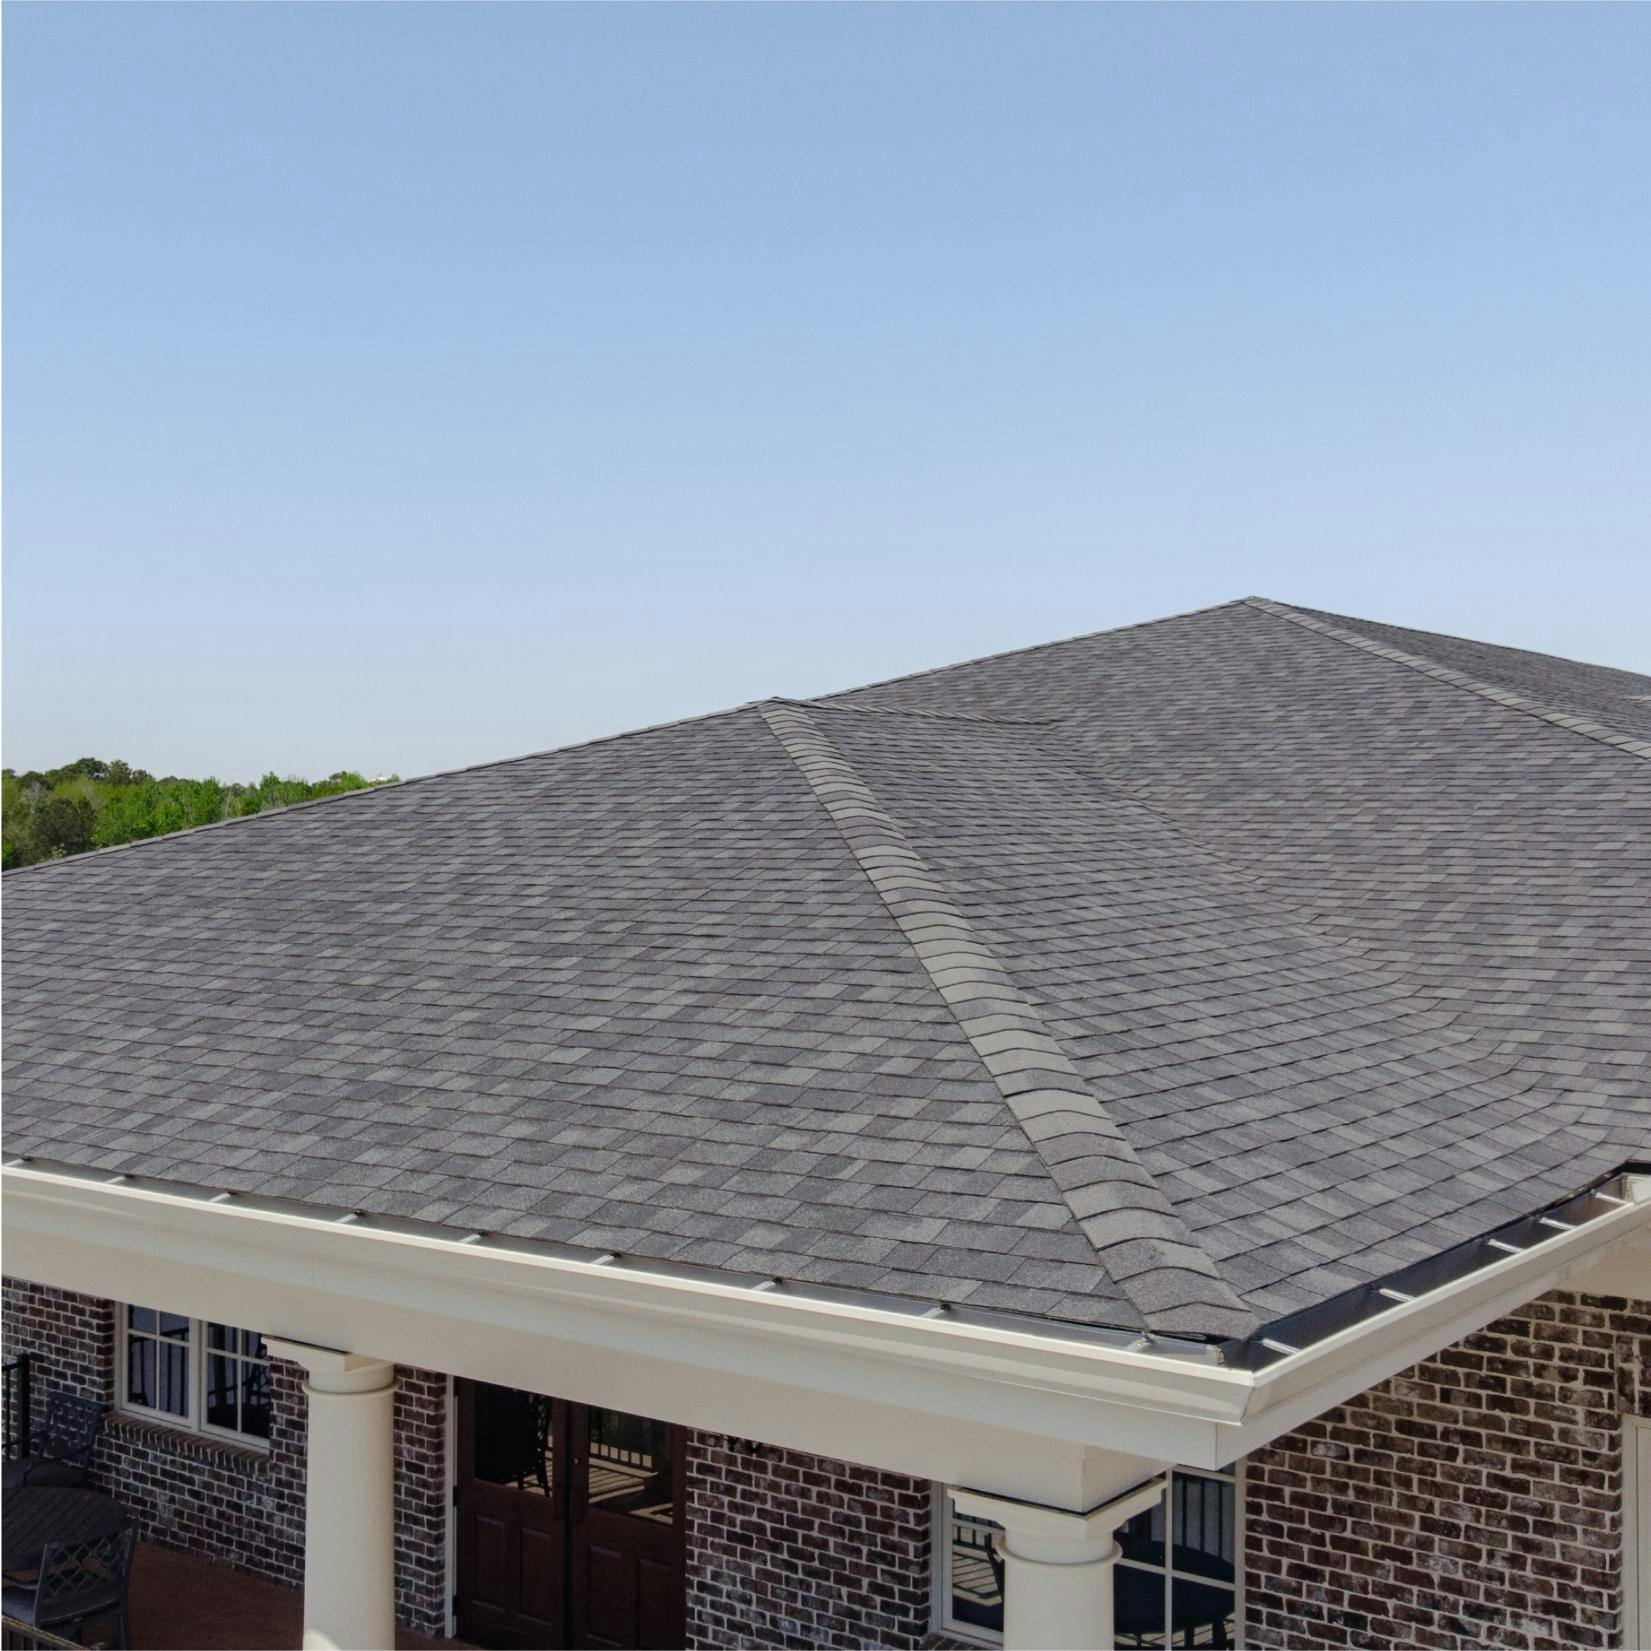 Bulloch First Bank Statesboro, Georgia | Charcoal Black Architectural Asphalt Shingles | Bulloch County Commercial Roofing Solutions | New Construction Commercial Roof